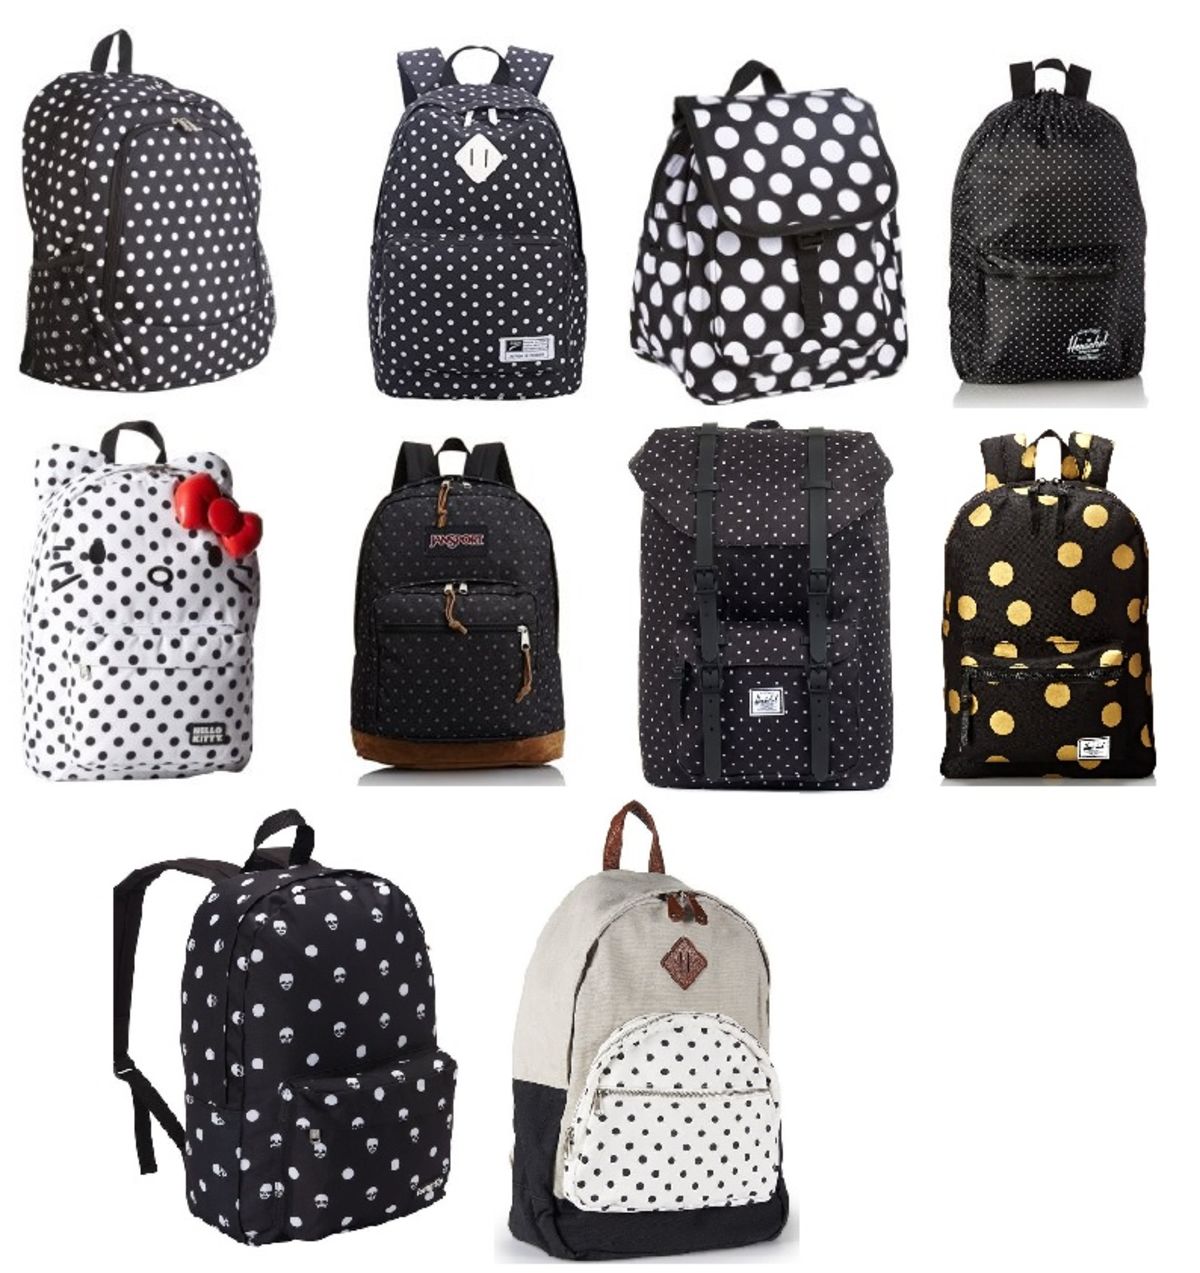 Headline for Best Black and White Polka Dot Backpacks for School and College